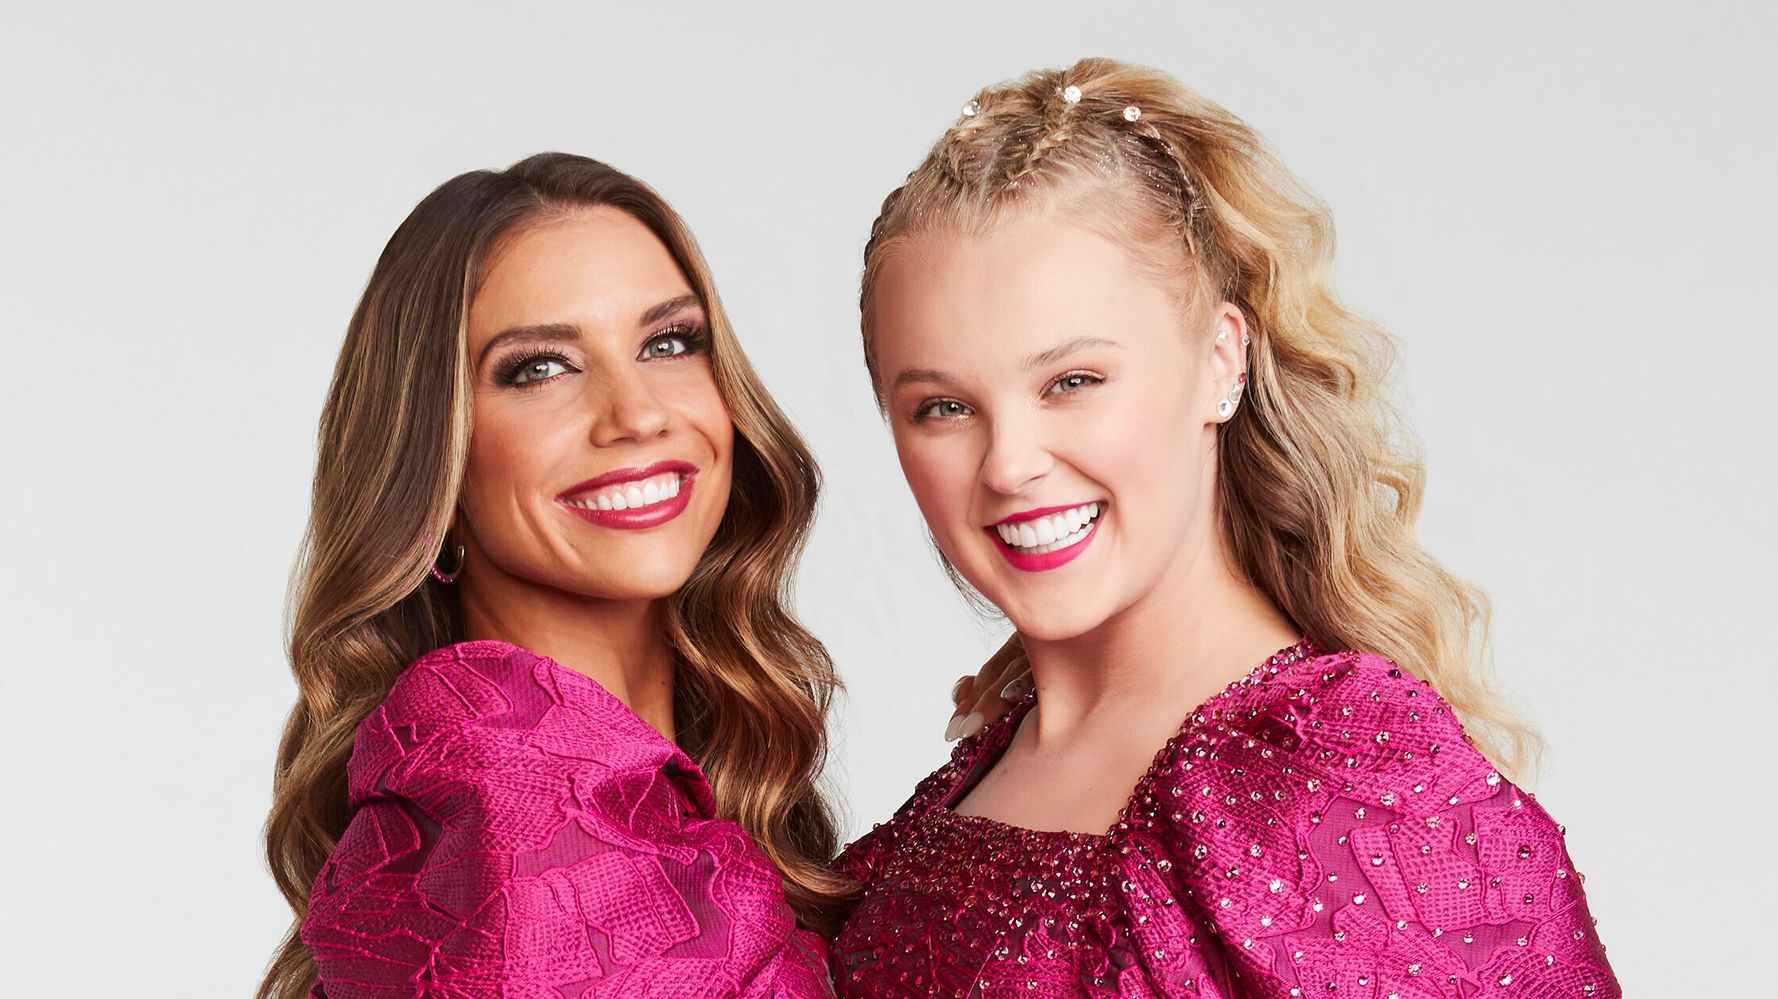 JoJo Siwa Makes 'Dancing With The Stars' History With Same-Sex Quickstep